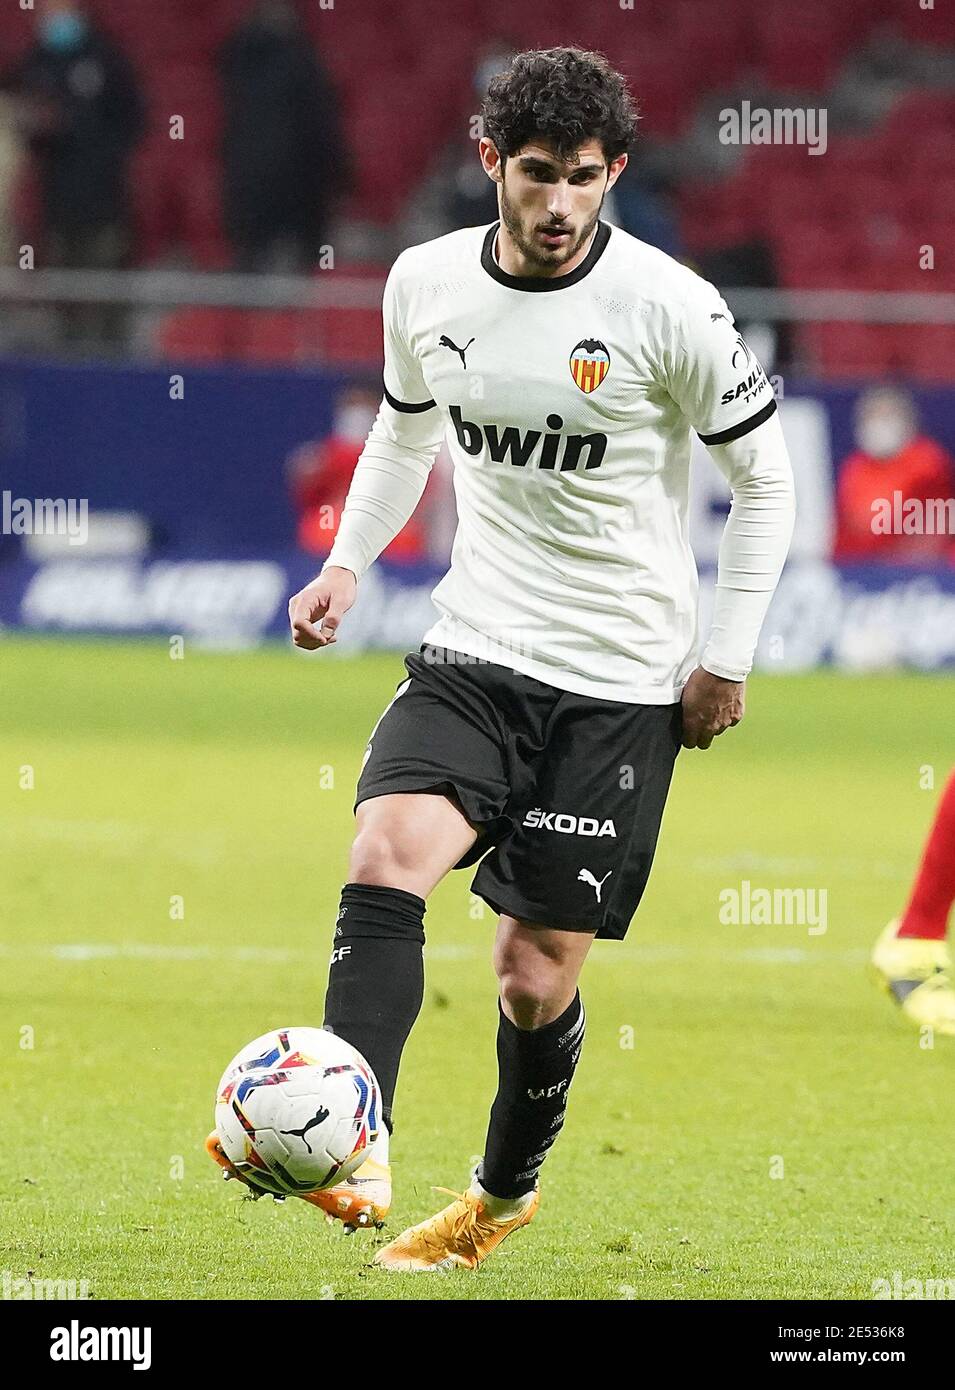 Valencia CF's Goncalo Guedes during La Liga match. Madrid, Spain, January  24, 2021. Photo by Acero/AlterPhotos/ABACAPRESS.COM Stock Photo - Alamy